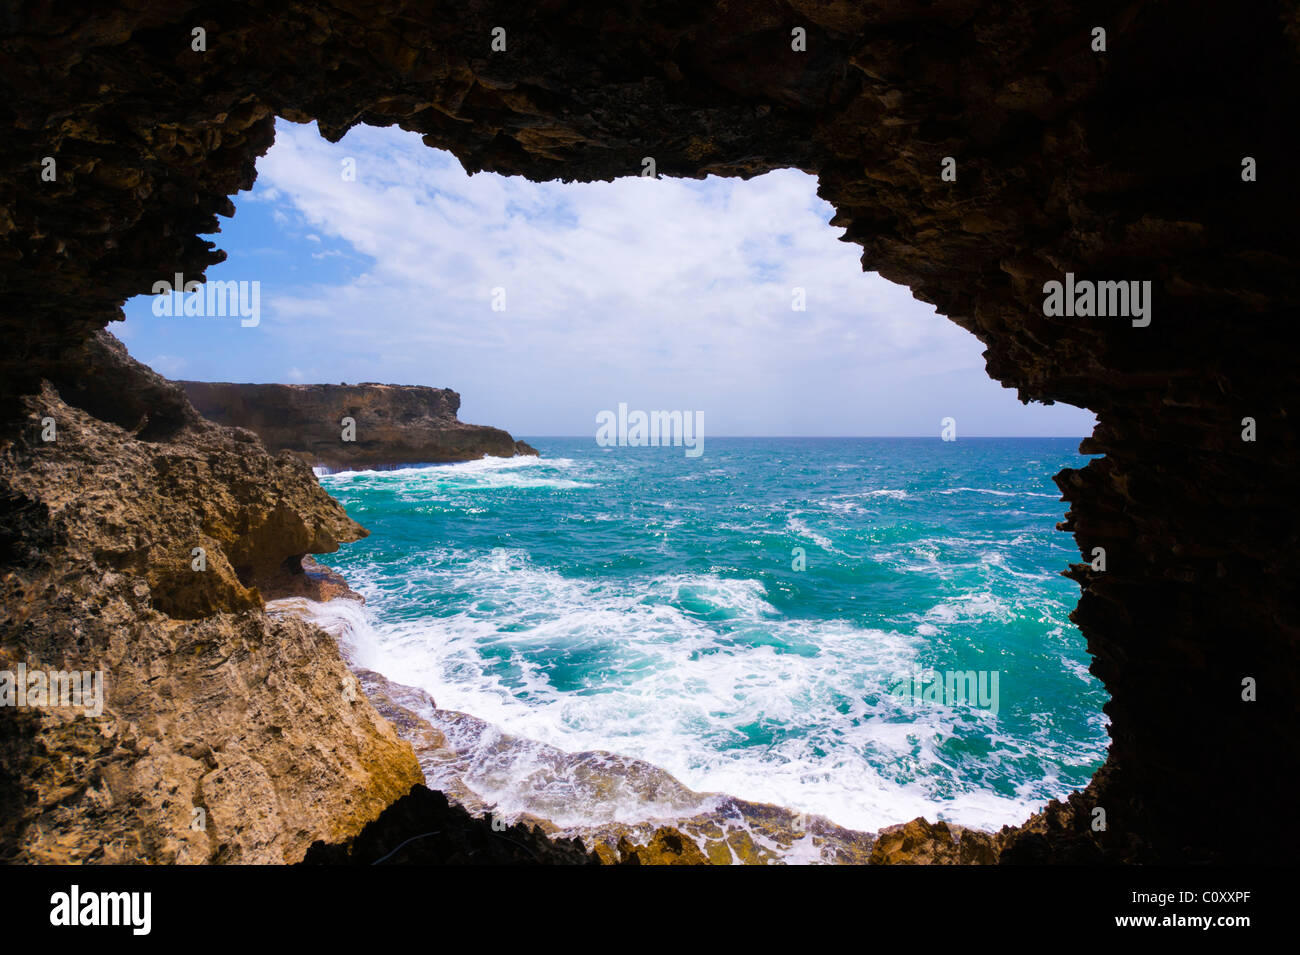 Animal Flower Cave, Barbados, coral and limestone grotto with visitor centre and views over sea Stock Photo